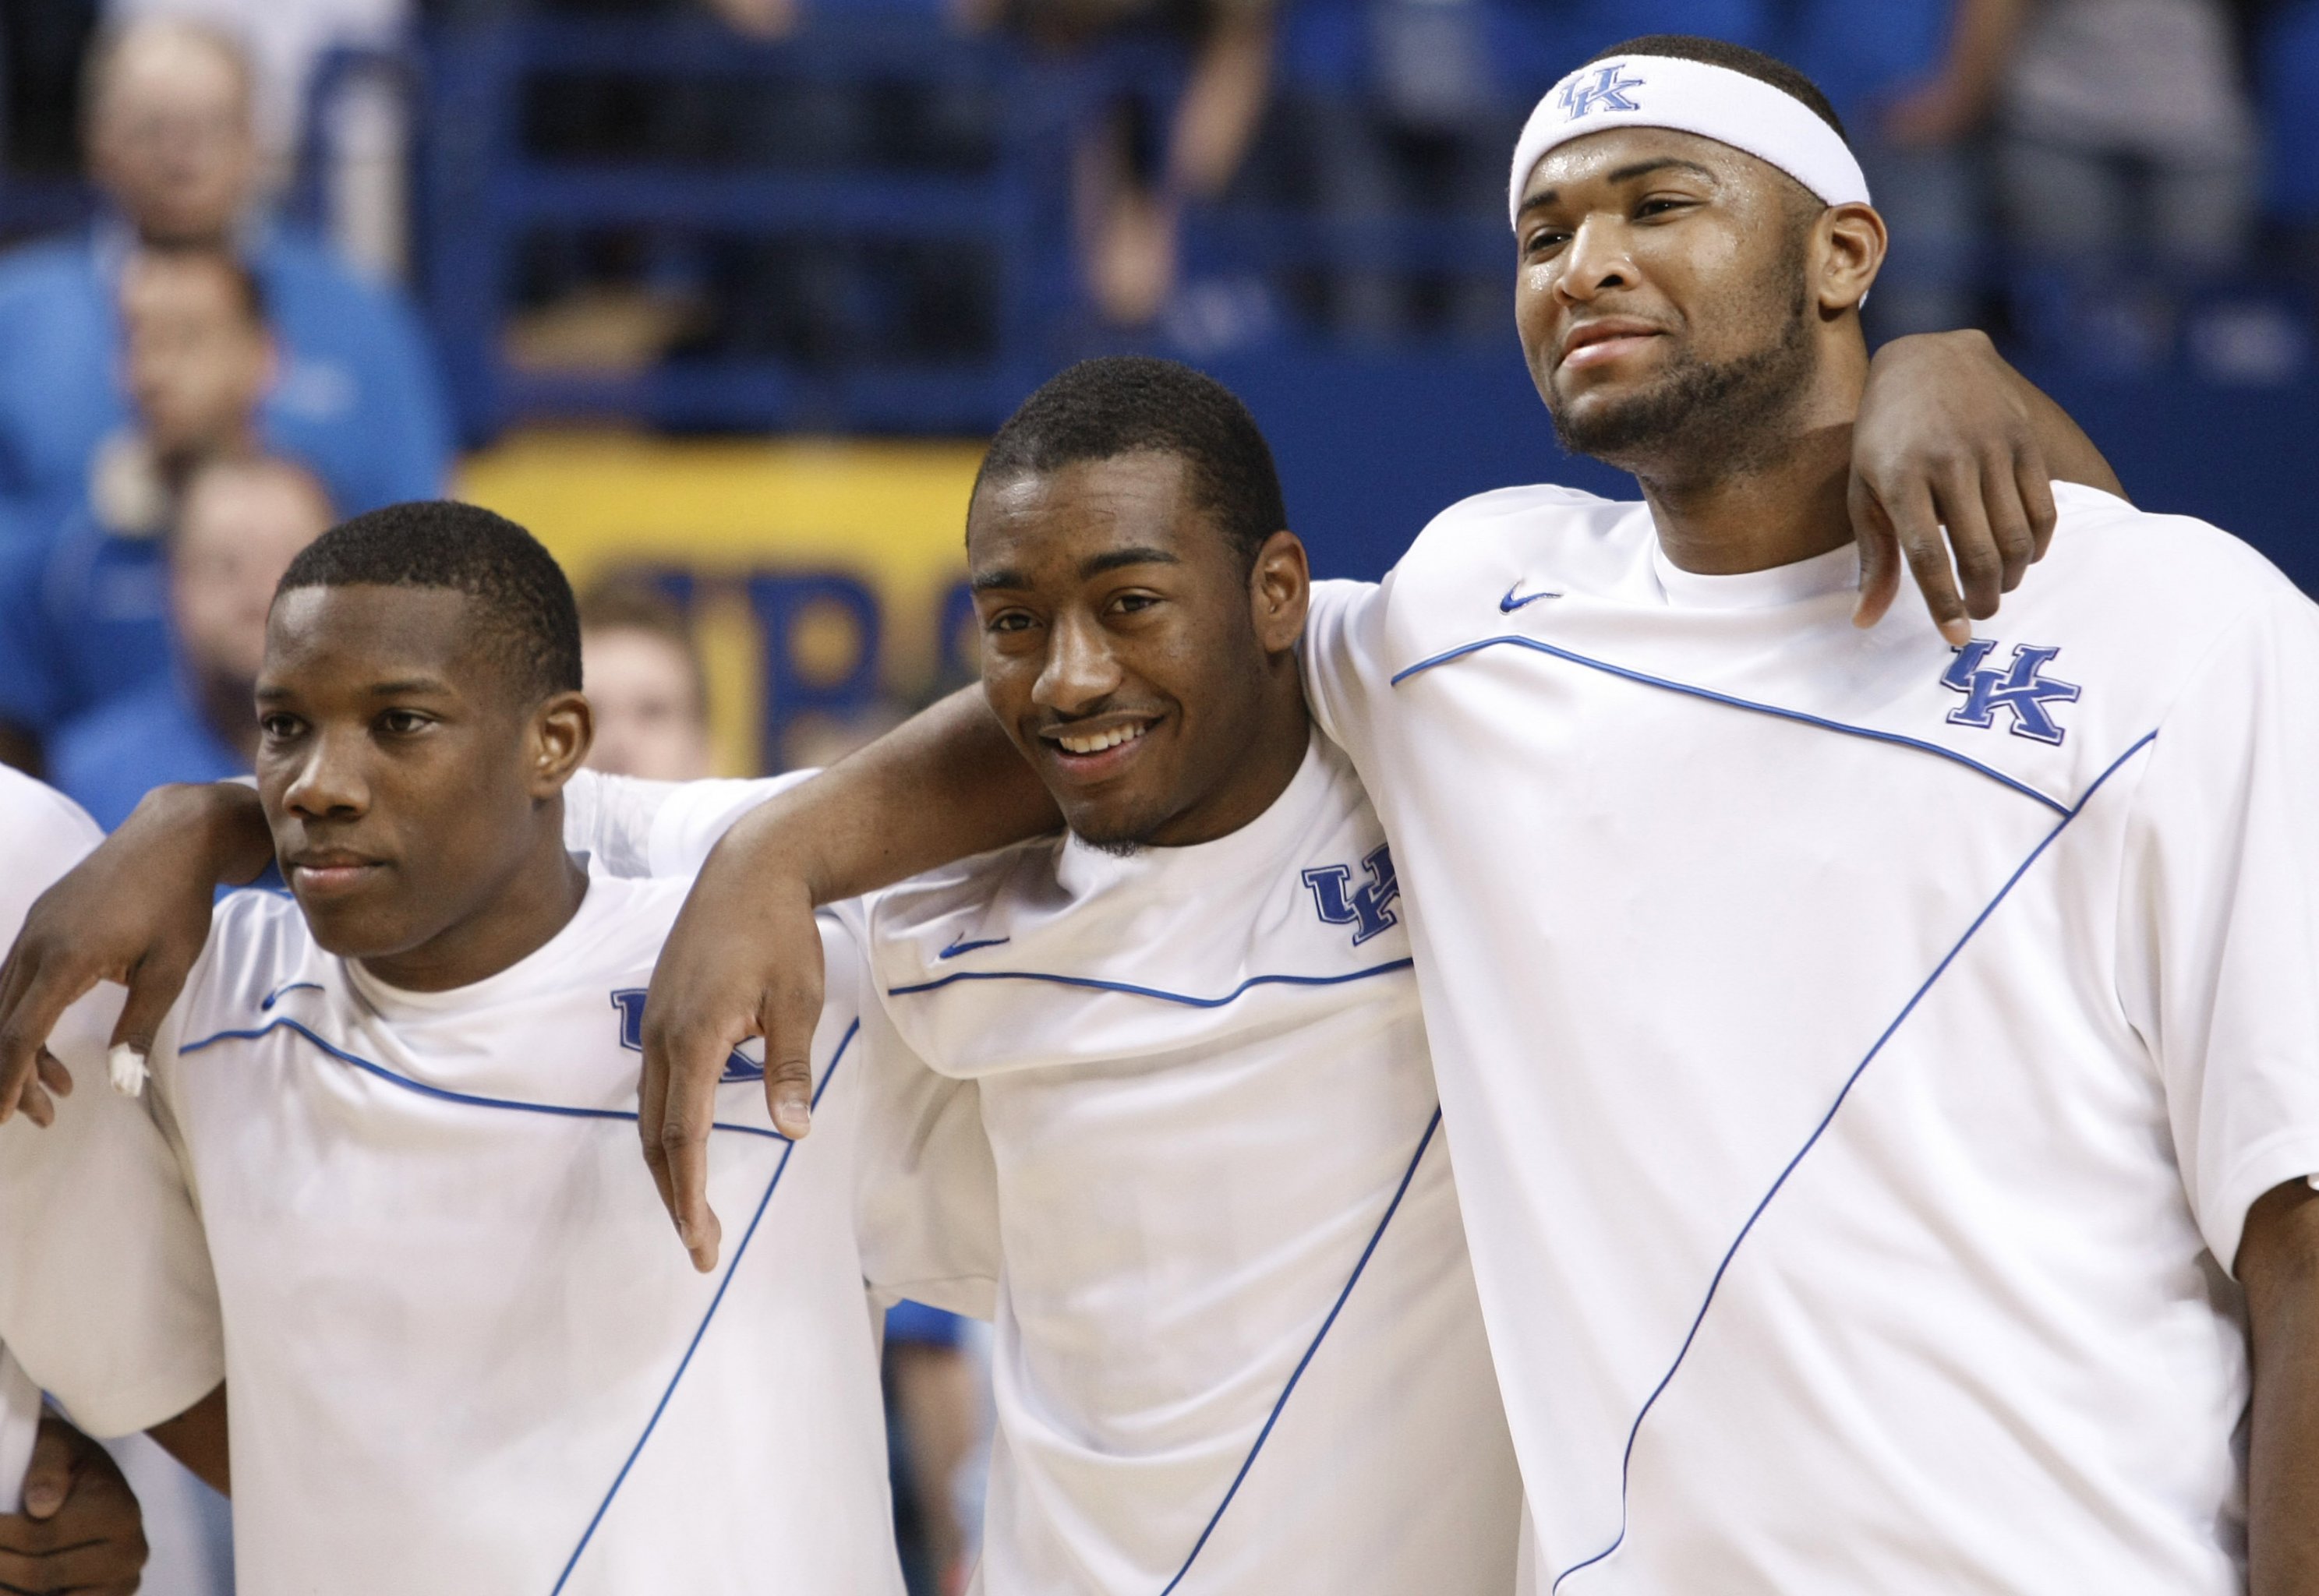 John Wall, DeMarcus Cousins upset over quarantine but ready to play